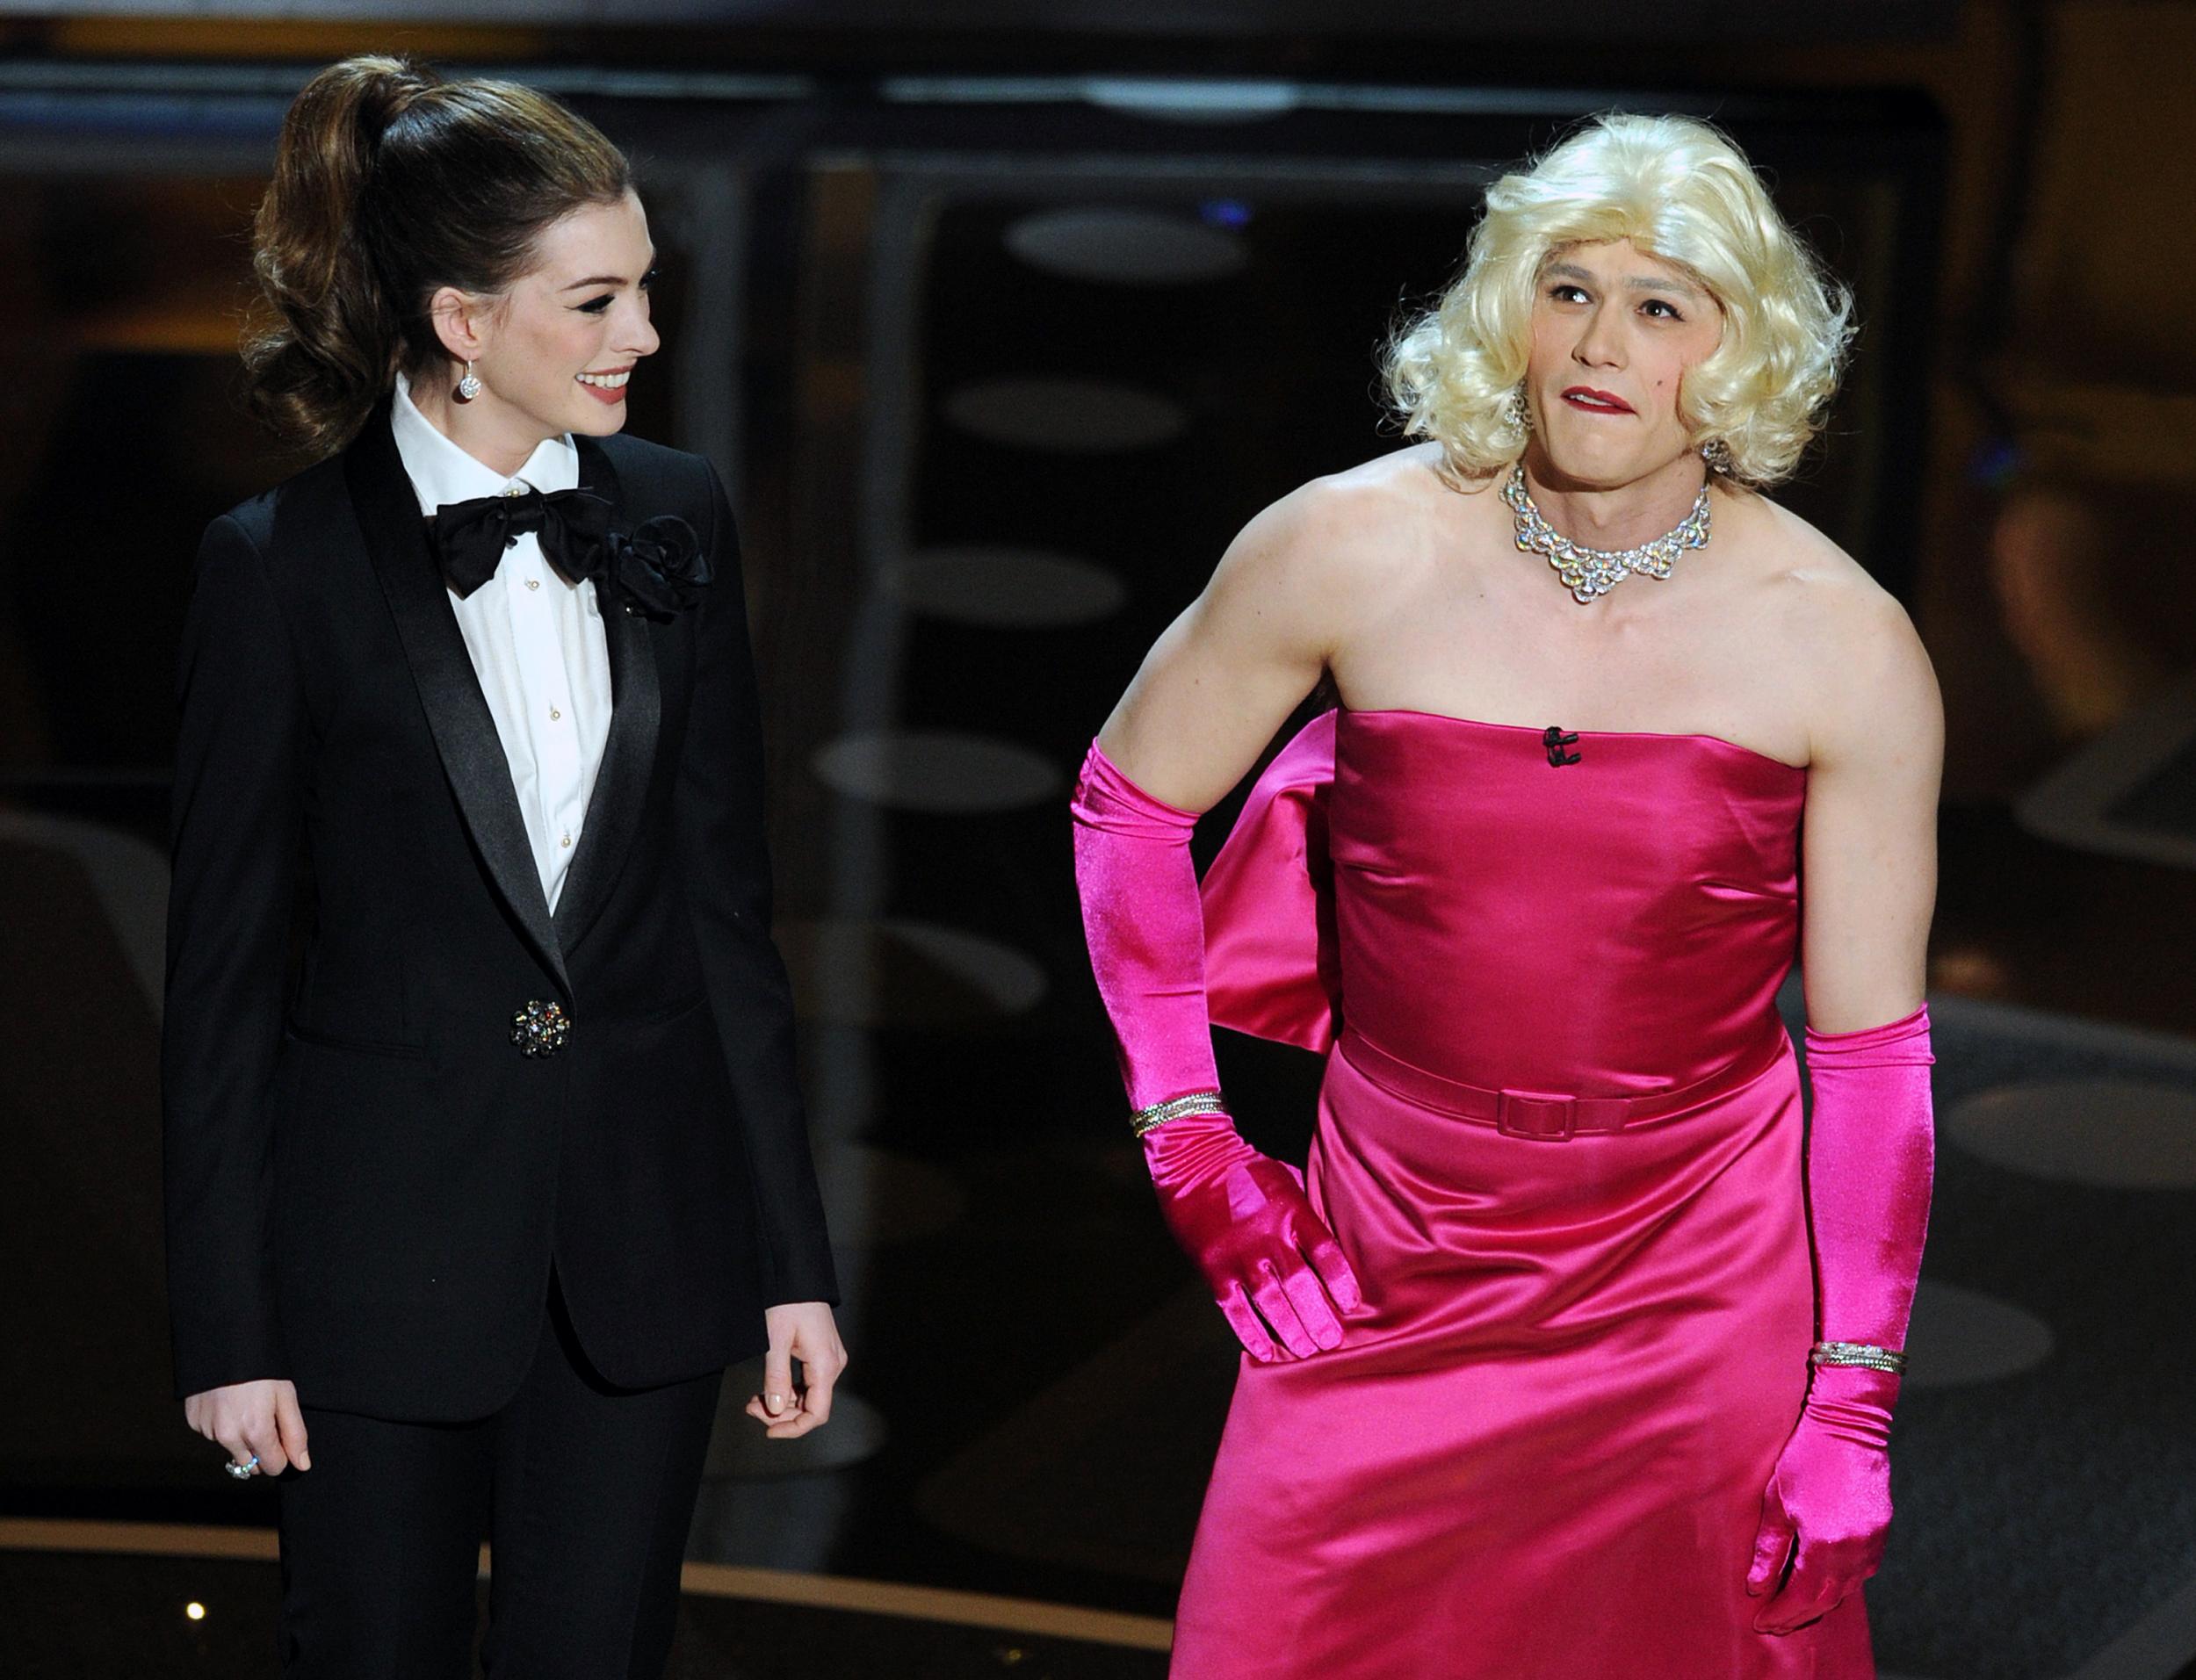 Frocky horror: ‘All the reasons why I turned it down came true,’ said Anne Hathaway of hosting the 2011 Oscars with James Franco